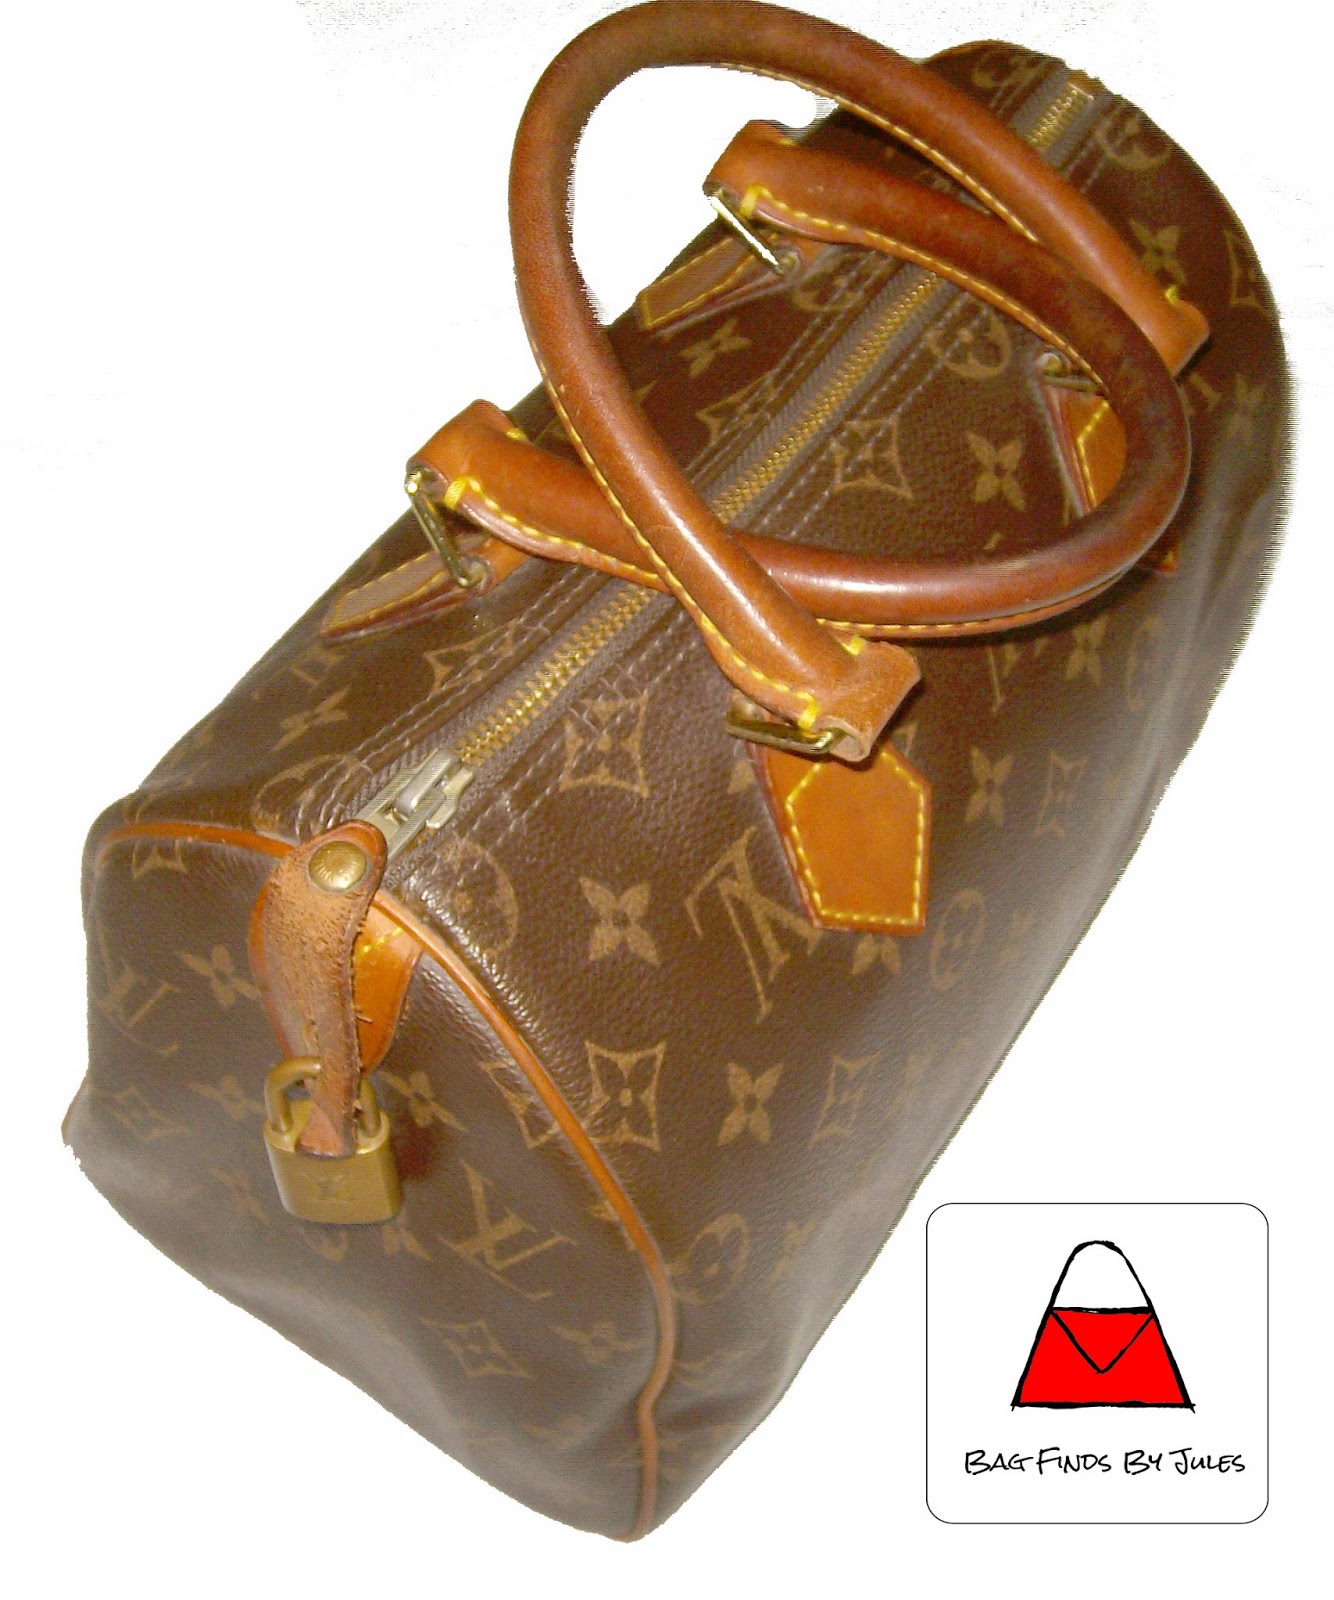 Louis Vuitton Speedy Bag Price Philippines | Confederated Tribes of the Umatilla Indian Reservation